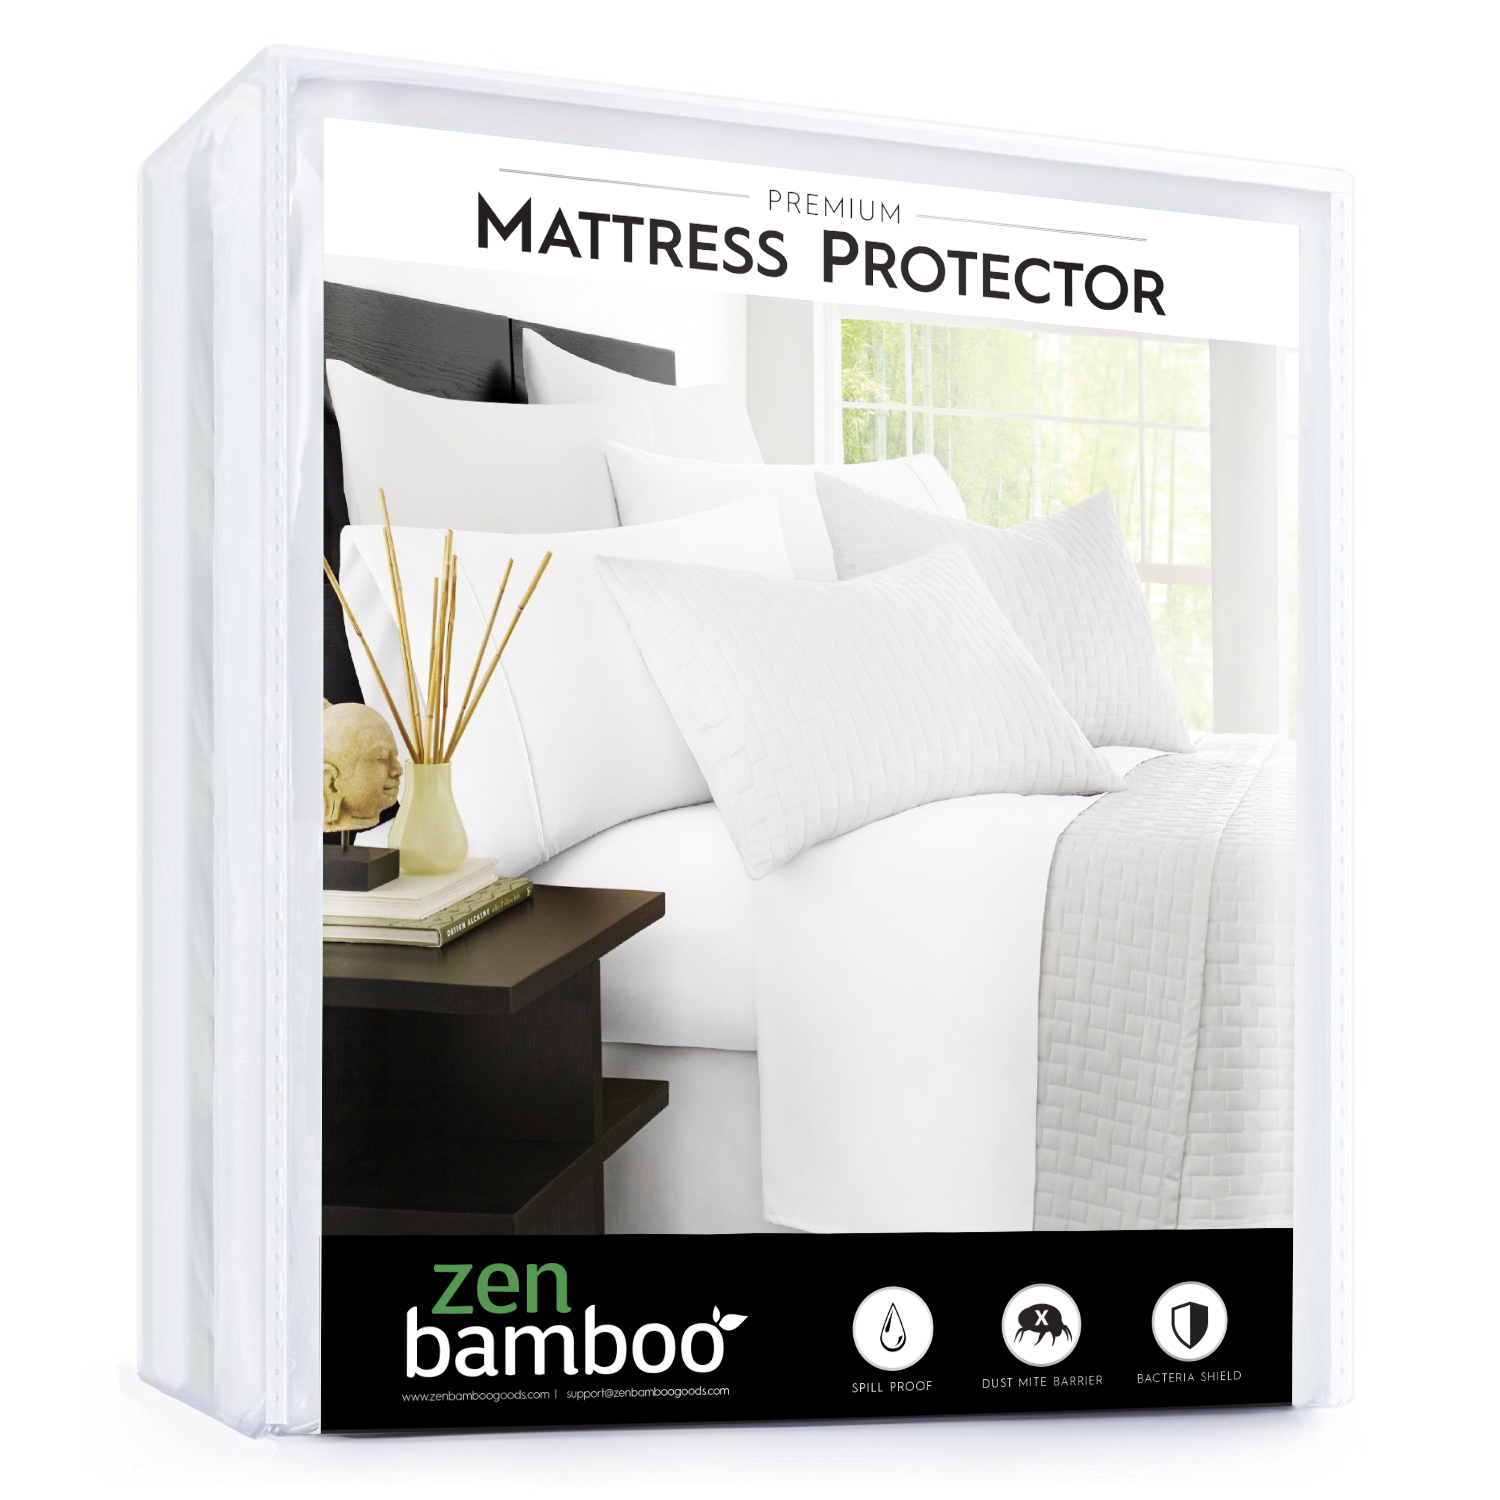 Noble Linen's 100% Rayon Derived from Bamboo Mattress Protector - image 3 of 4